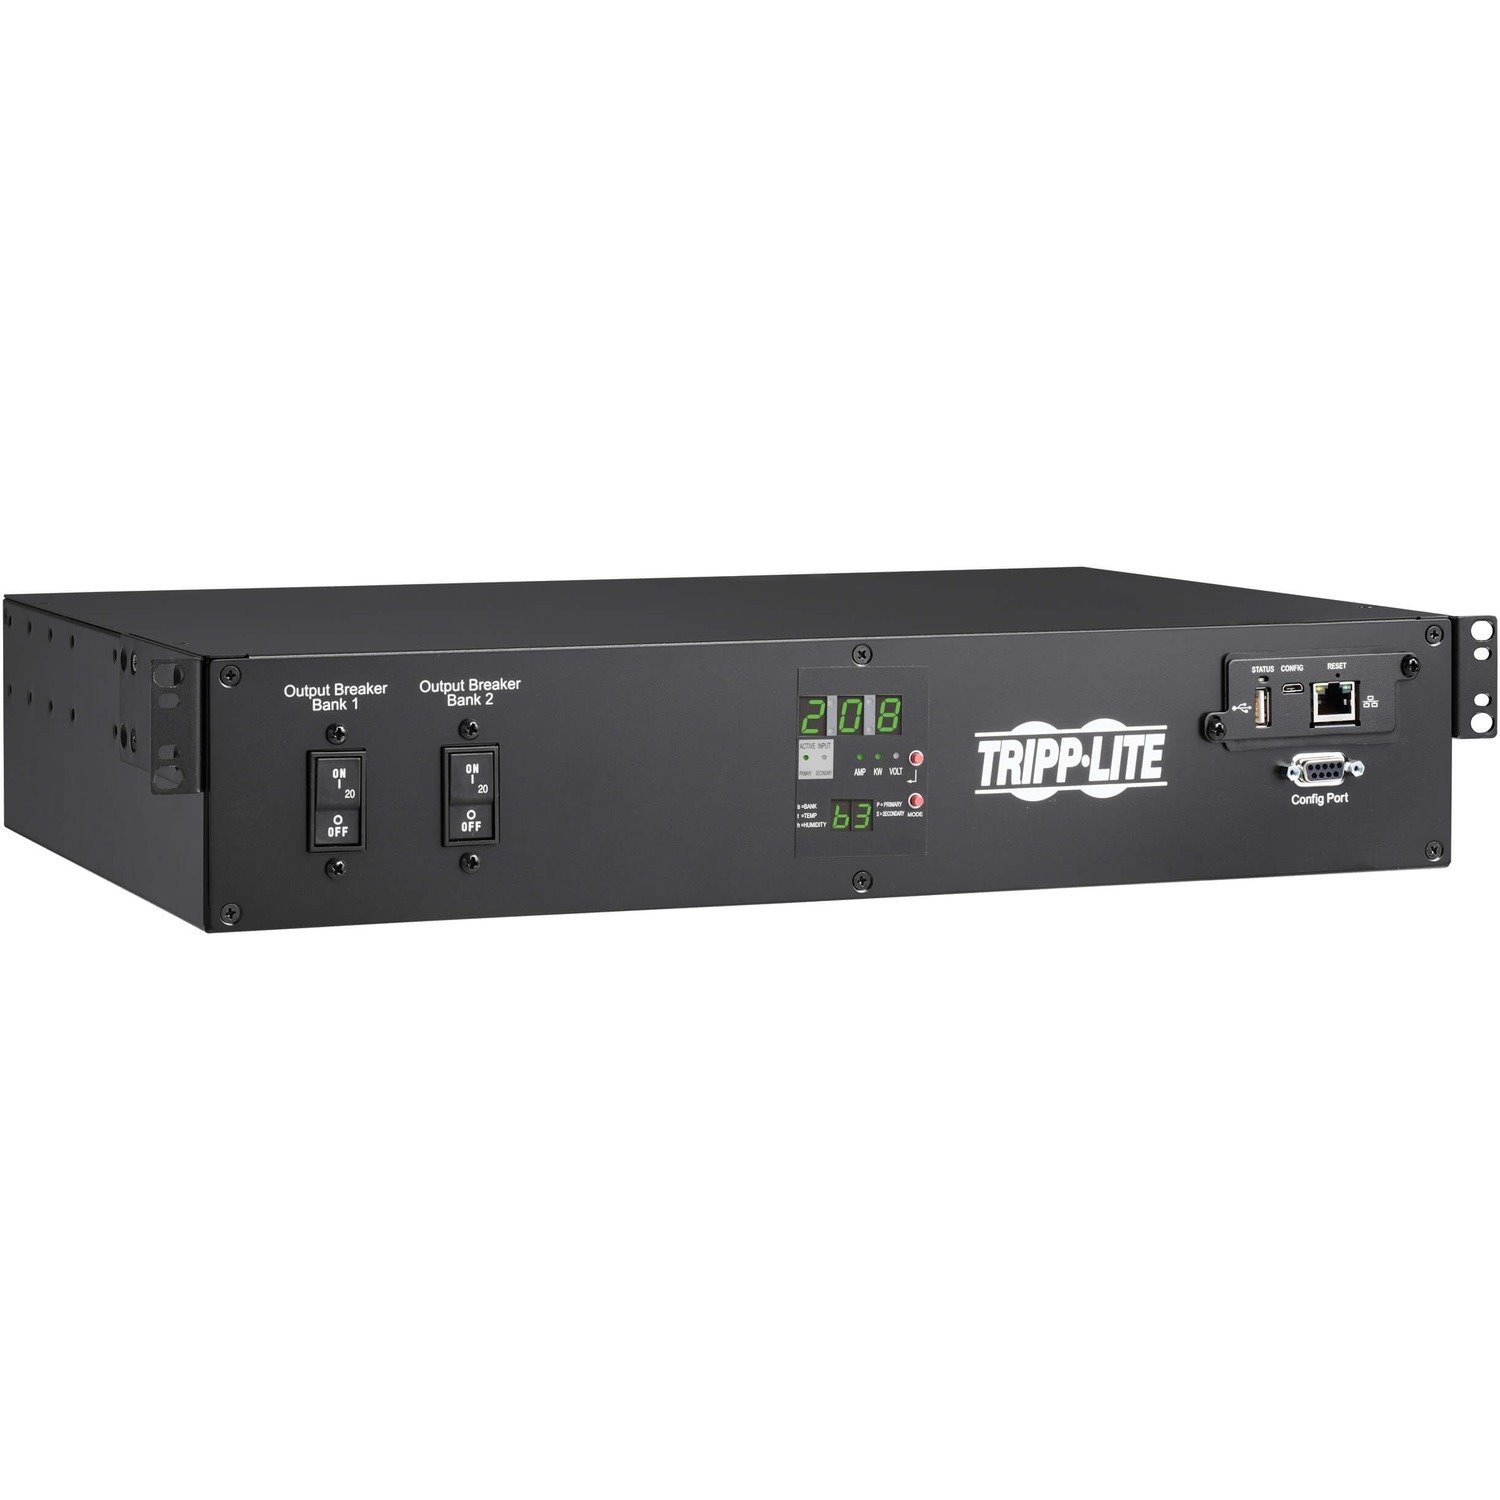 Tripp Lite by Eaton 5.8kW 208/240V Single-Phase ATS/Monitored PDU - 16 C13, 2 C19 & 1 L6-30R Outlets, Dual L6-30P Inputs, 10 ft. Cords, 2U, TAA